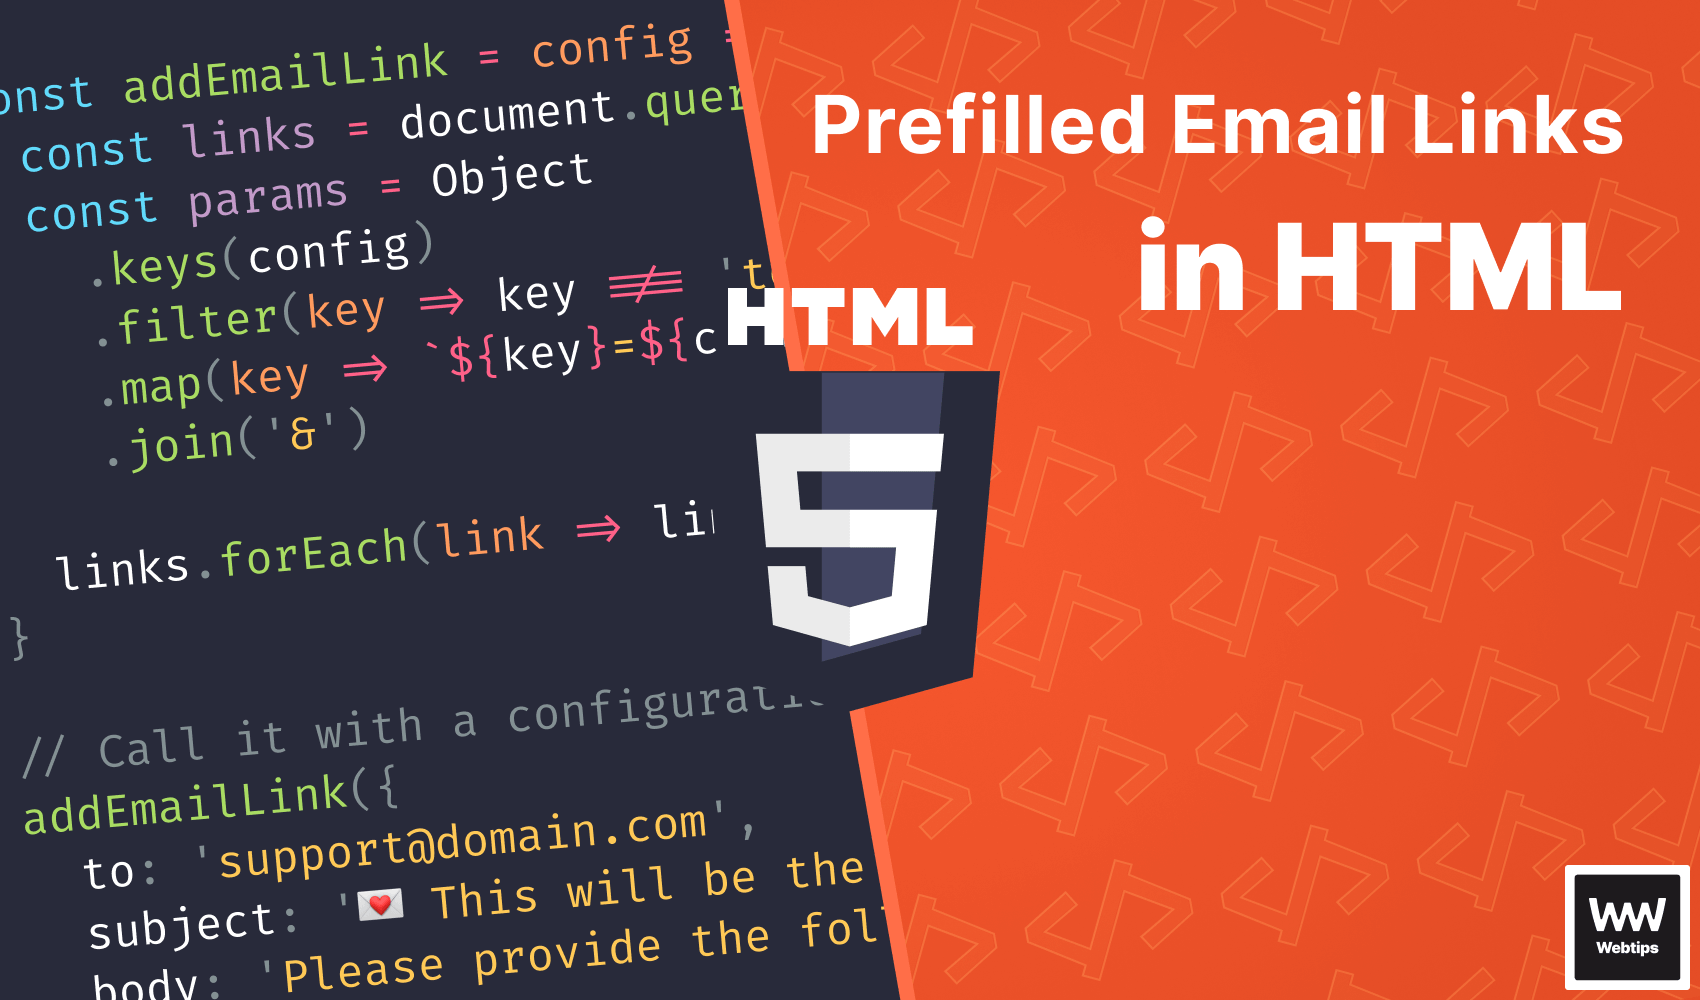 How to Create Prefilled Email Links in HTML